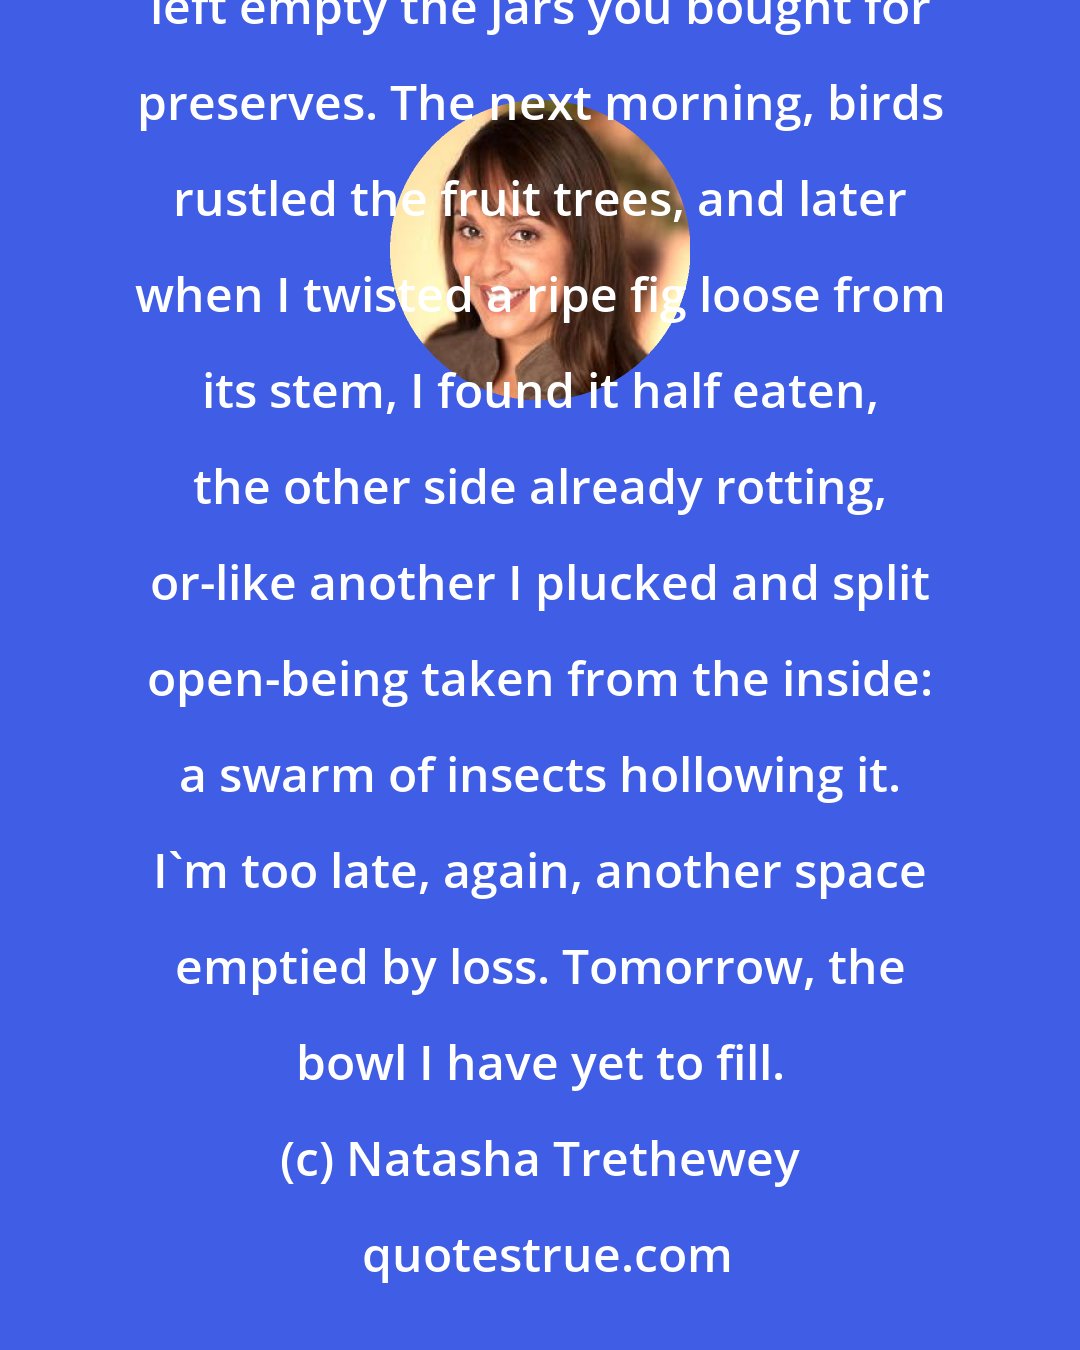 Natasha Trethewey: First, I emptied the closets of your clothes, threw out the bowl of fruit, bruised from your touch, left empty the jars you bought for preserves. The next morning, birds rustled the fruit trees, and later when I twisted a ripe fig loose from its stem, I found it half eaten, the other side already rotting, or-like another I plucked and split open-being taken from the inside: a swarm of insects hollowing it. I'm too late, again, another space emptied by loss. Tomorrow, the bowl I have yet to fill.